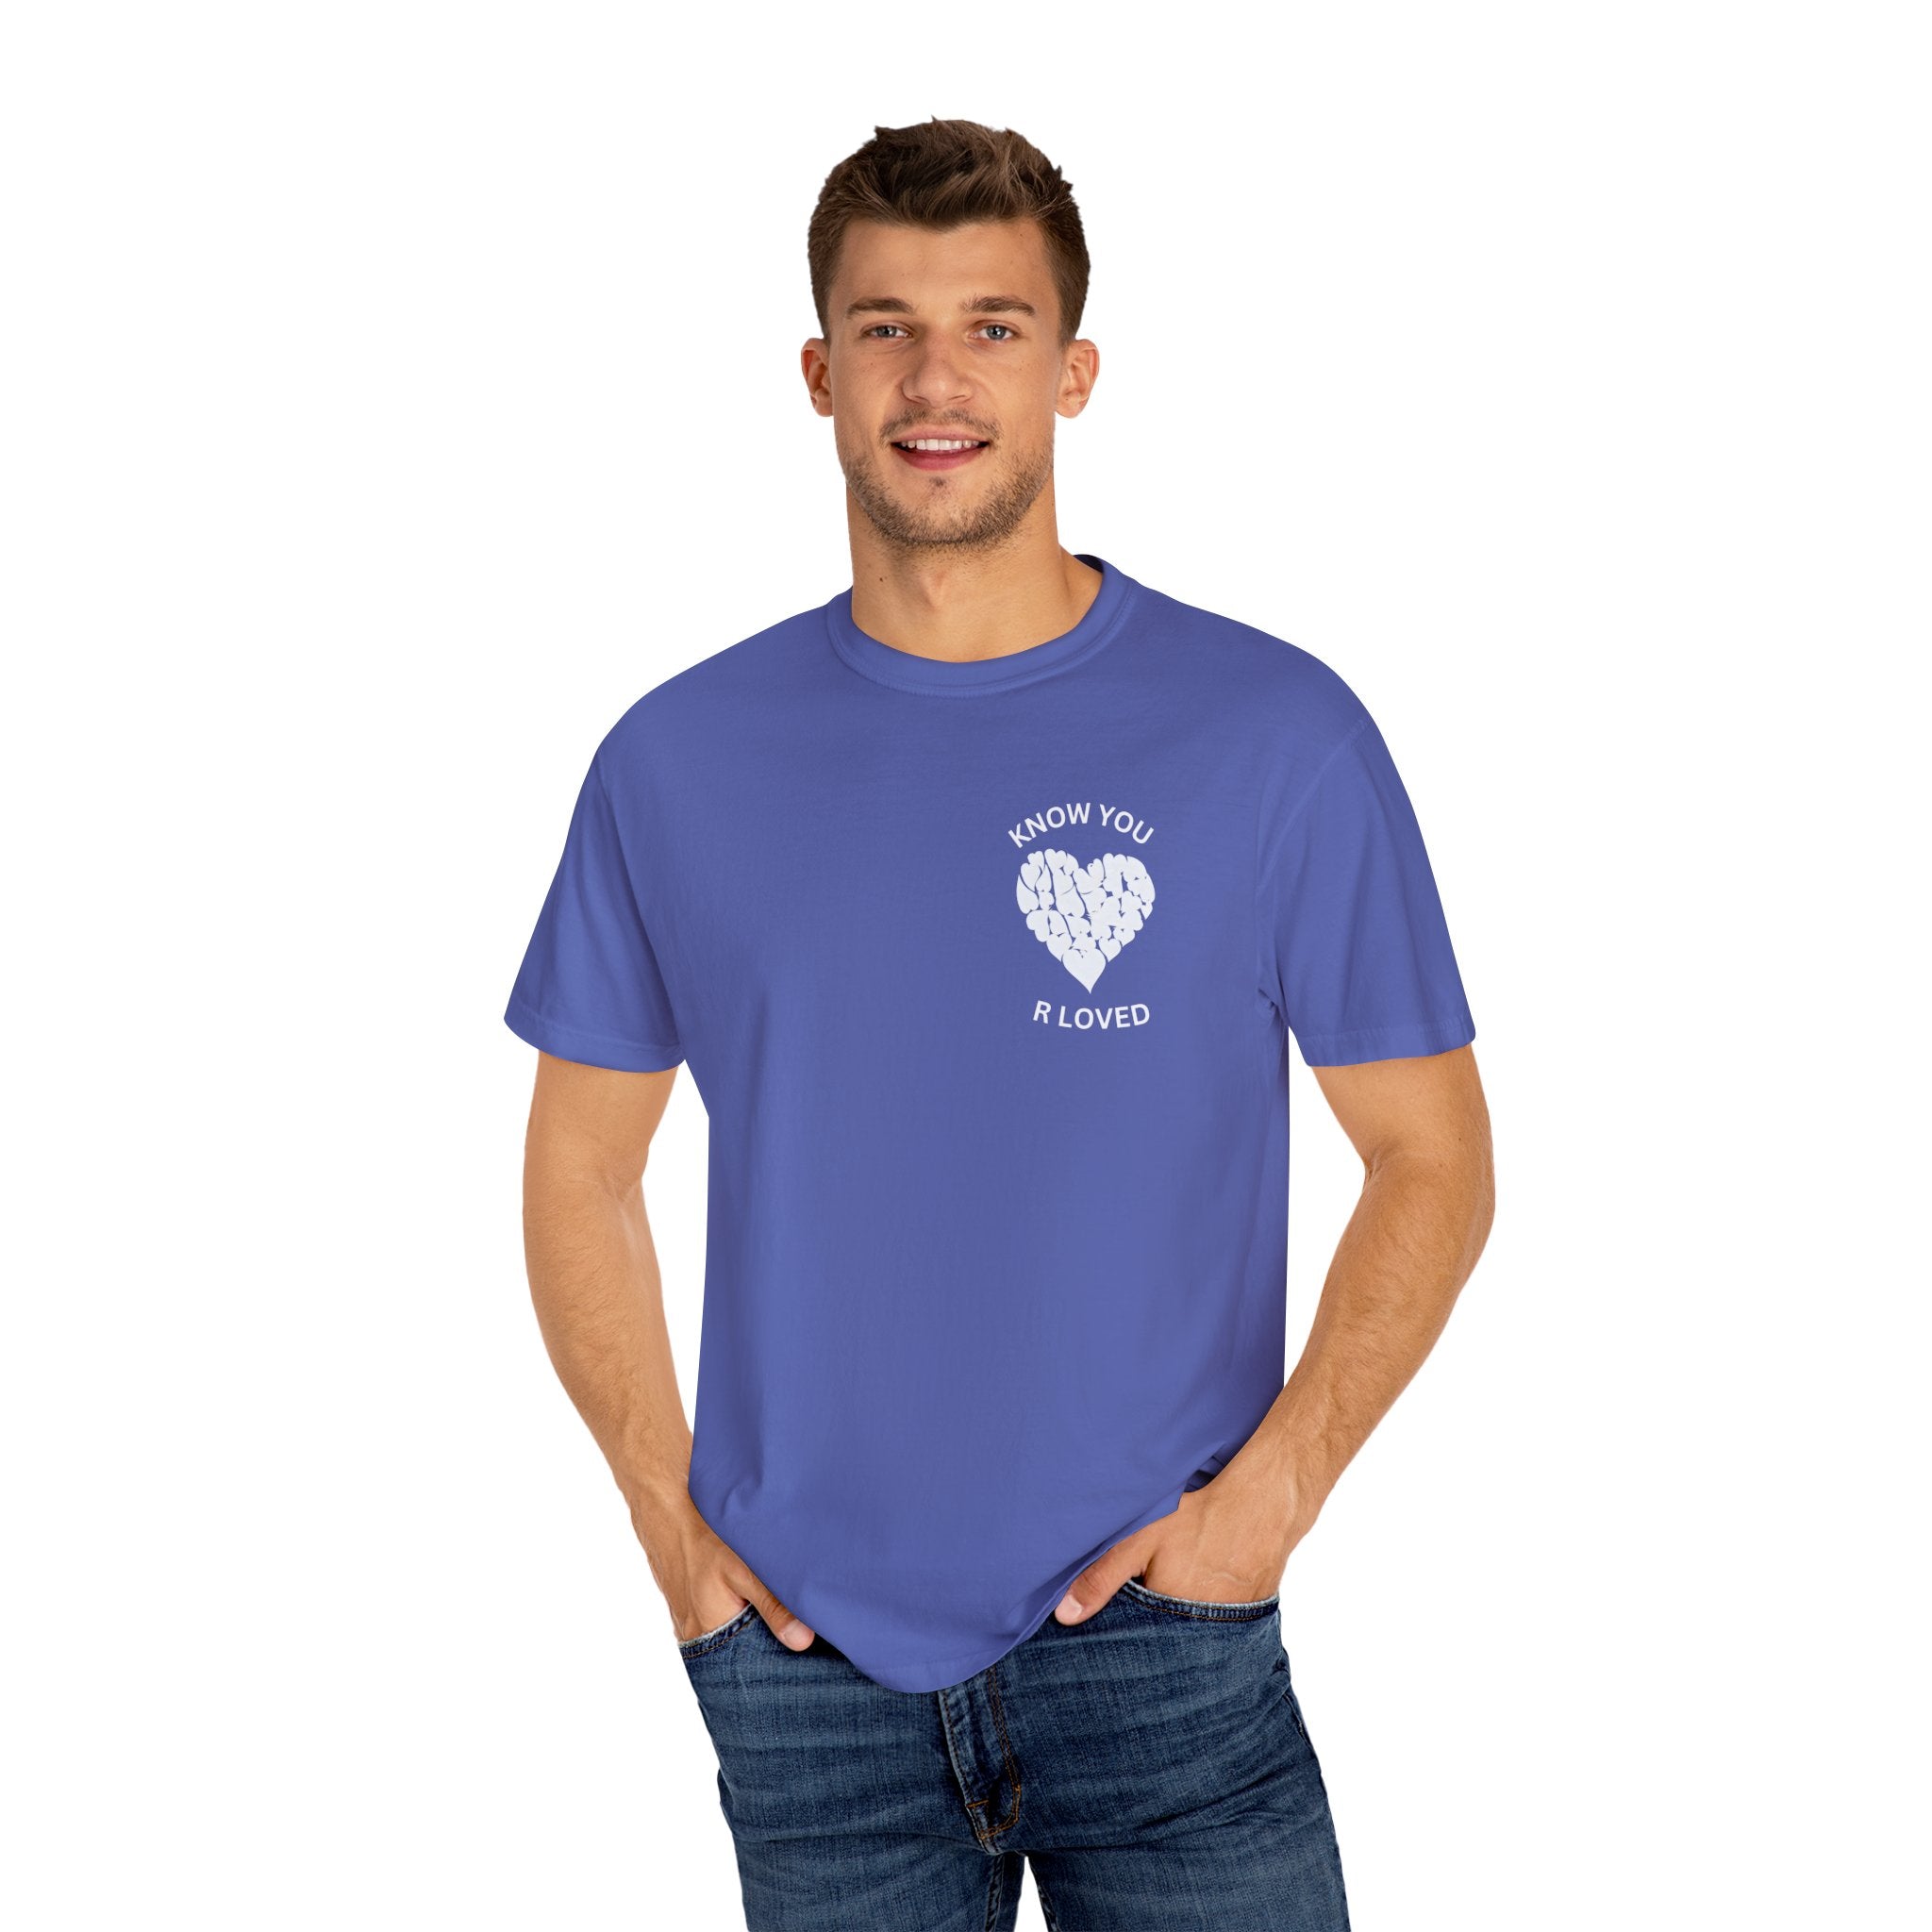 Know You Are Loved, Unisex T-Shirt